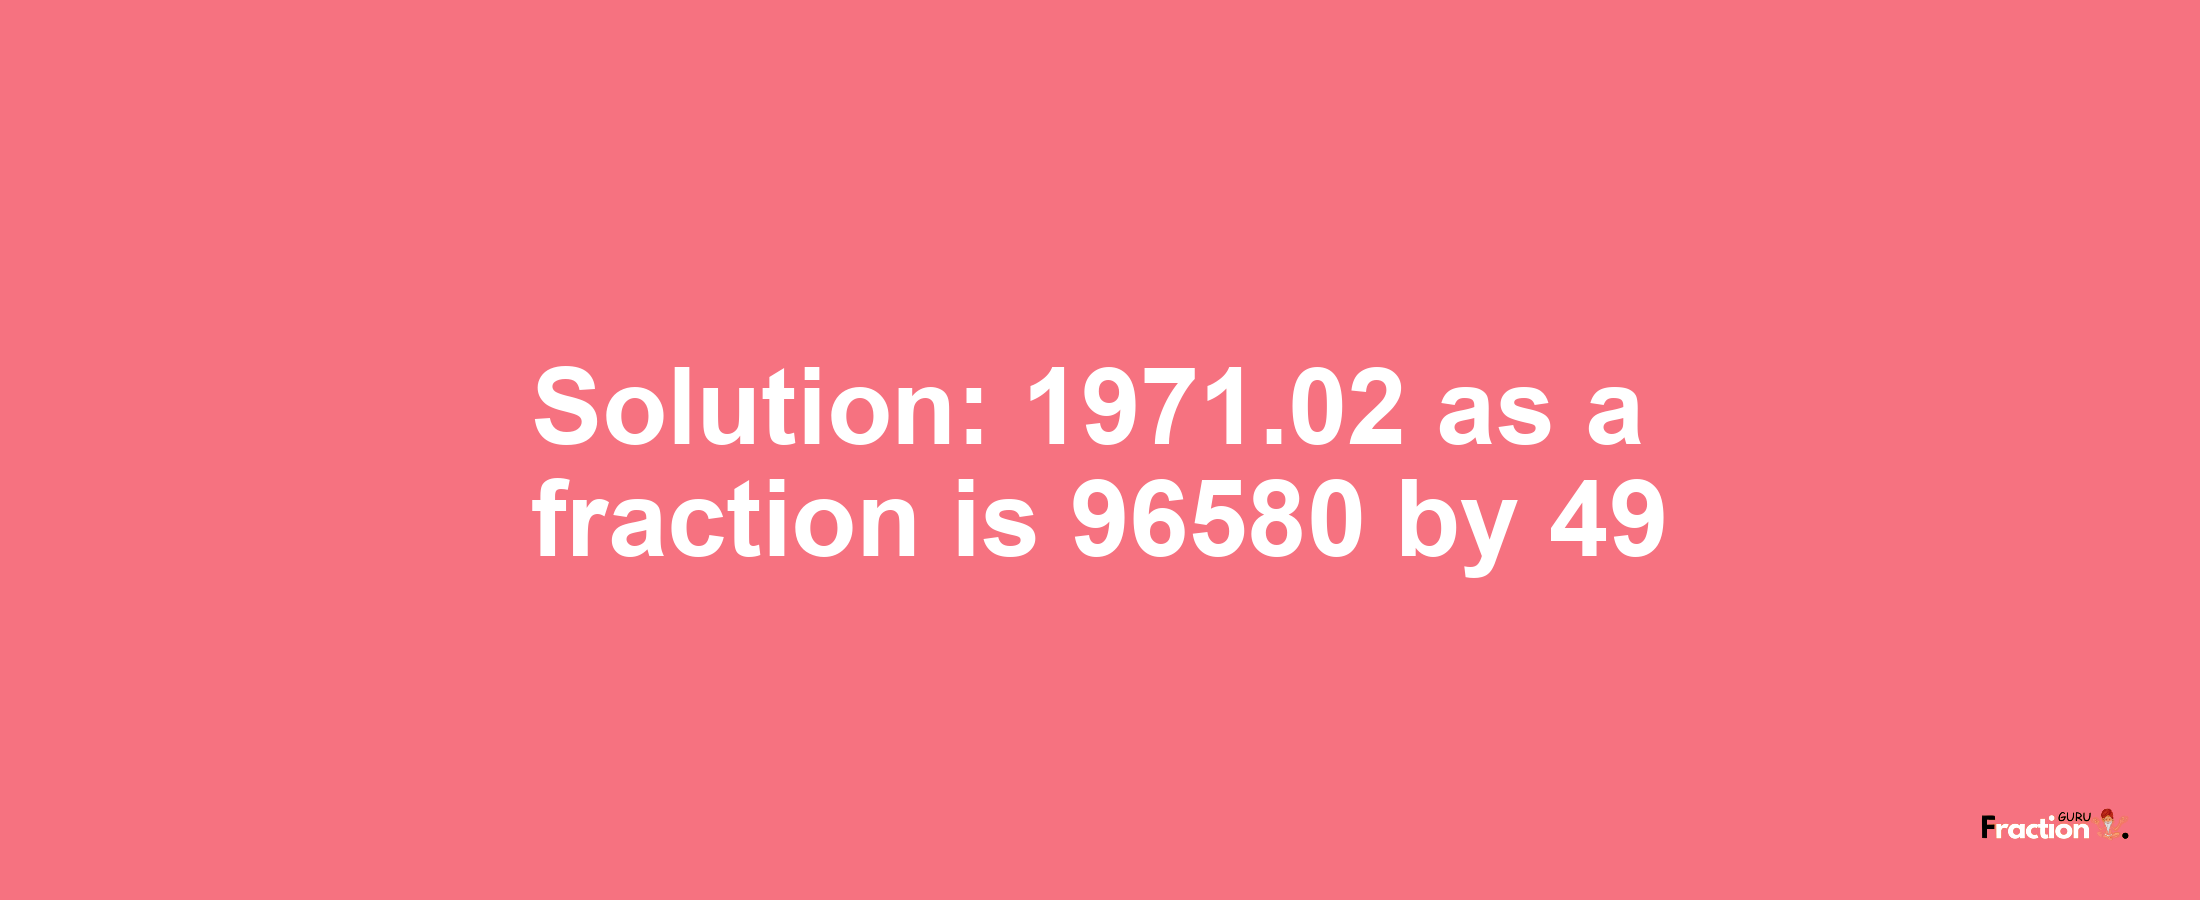 Solution:1971.02 as a fraction is 96580/49